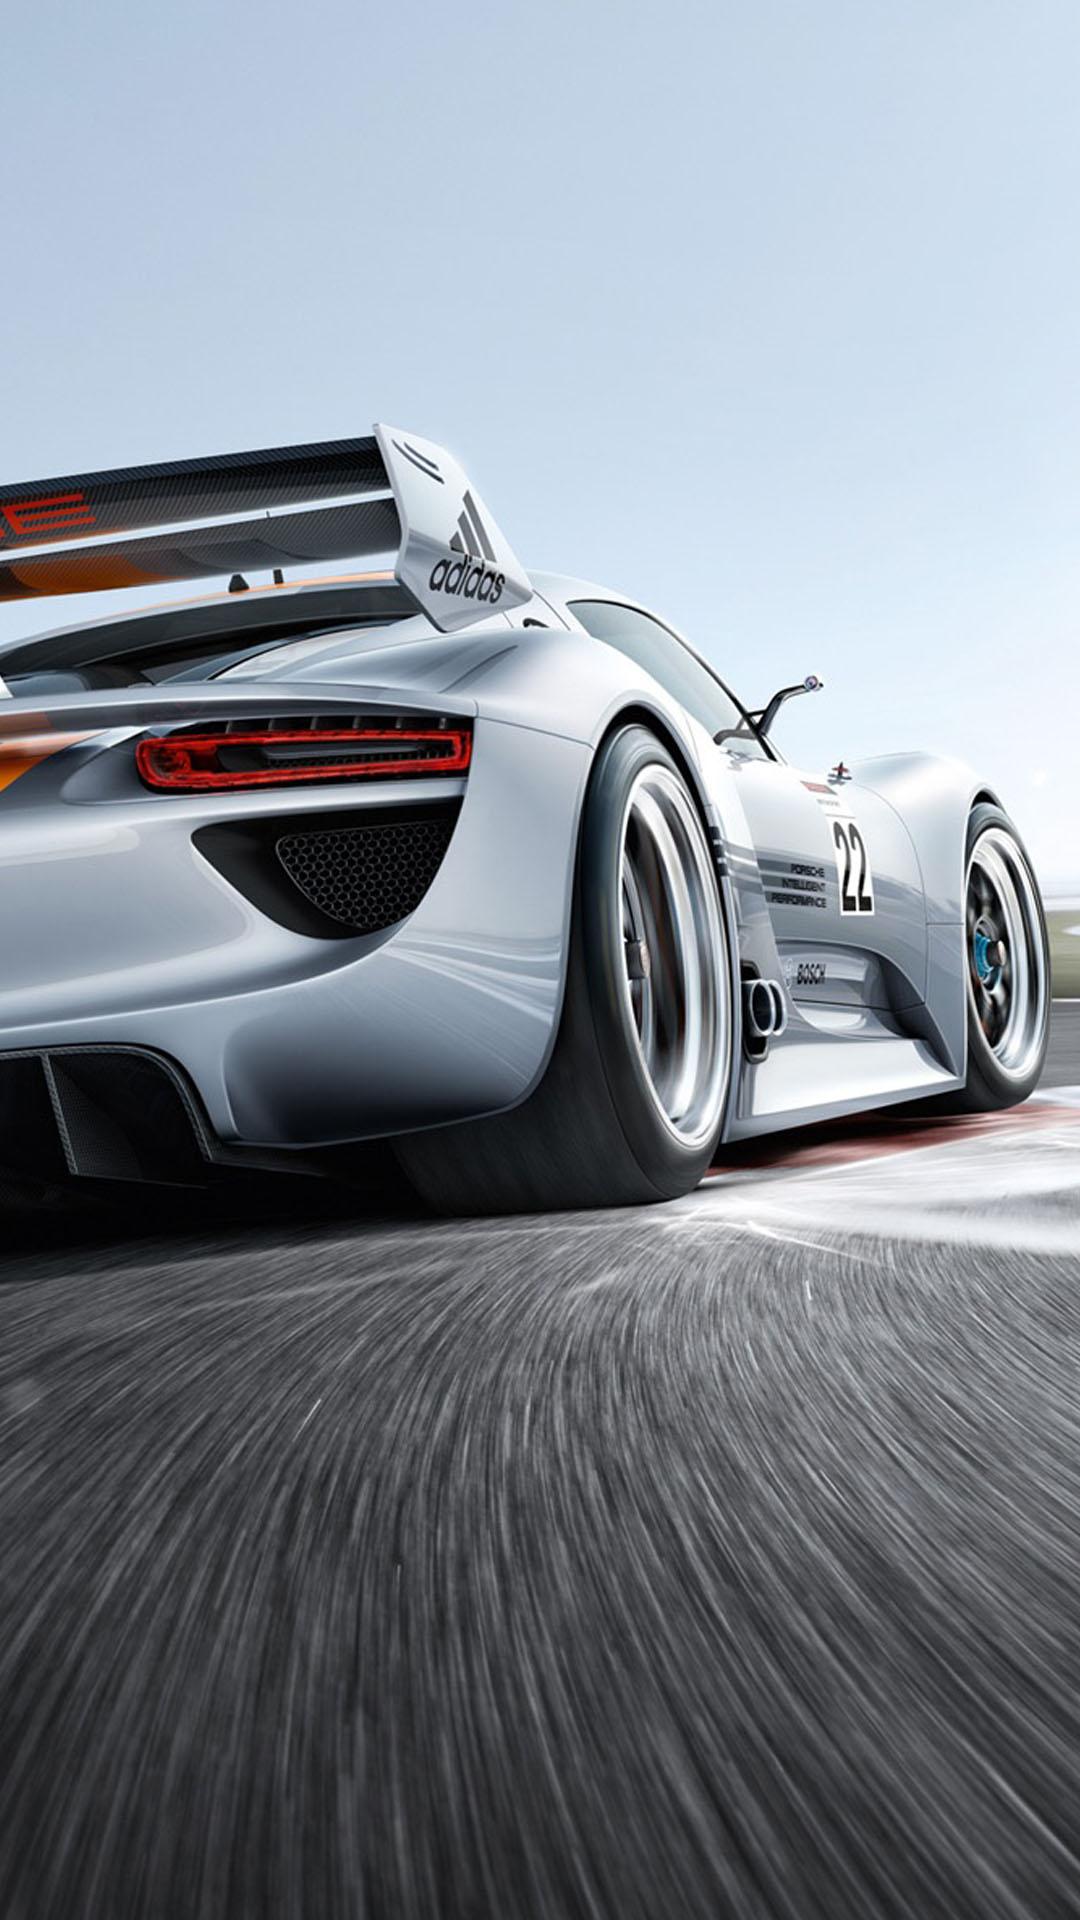 Porsche 918 RSR htc one wallpaper, free and easy to